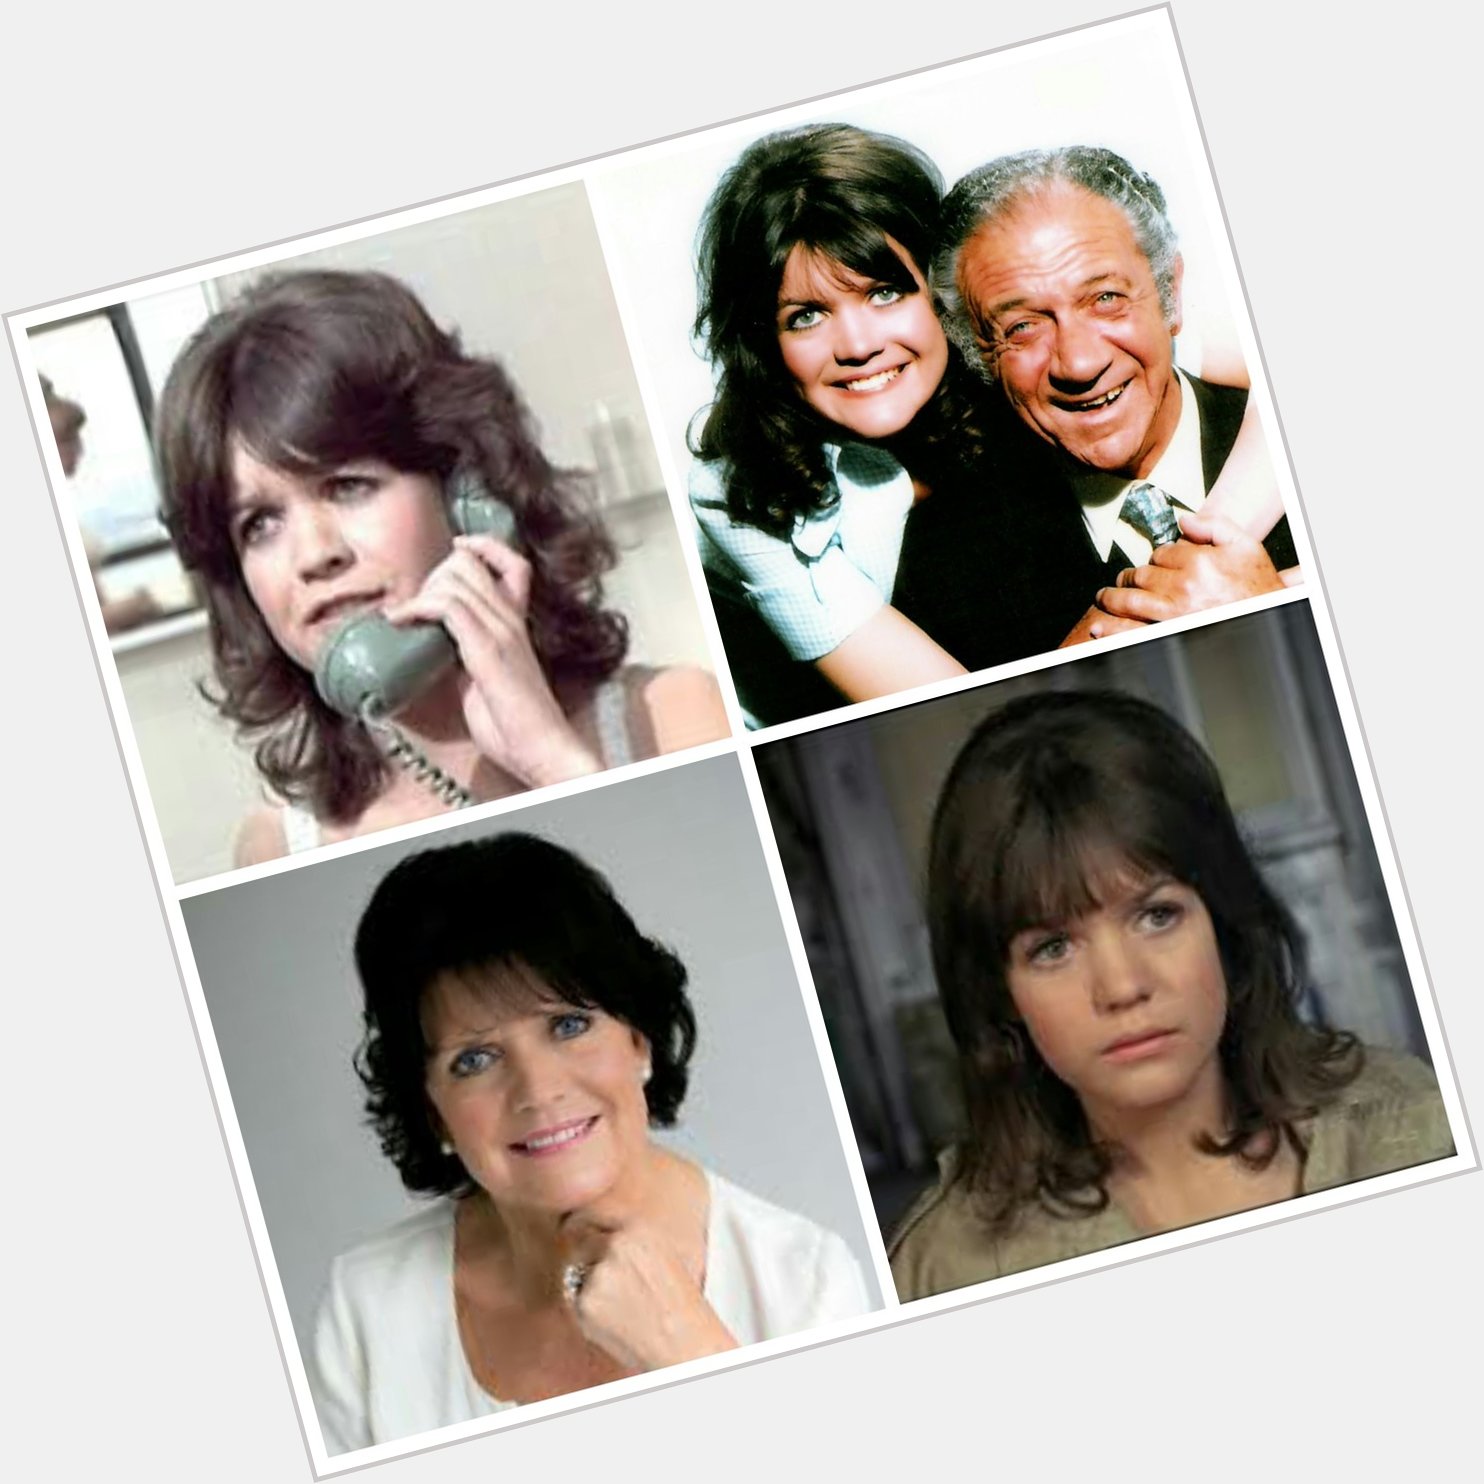 Sally Geeson is 67 today, Happy Birthday Sally! 